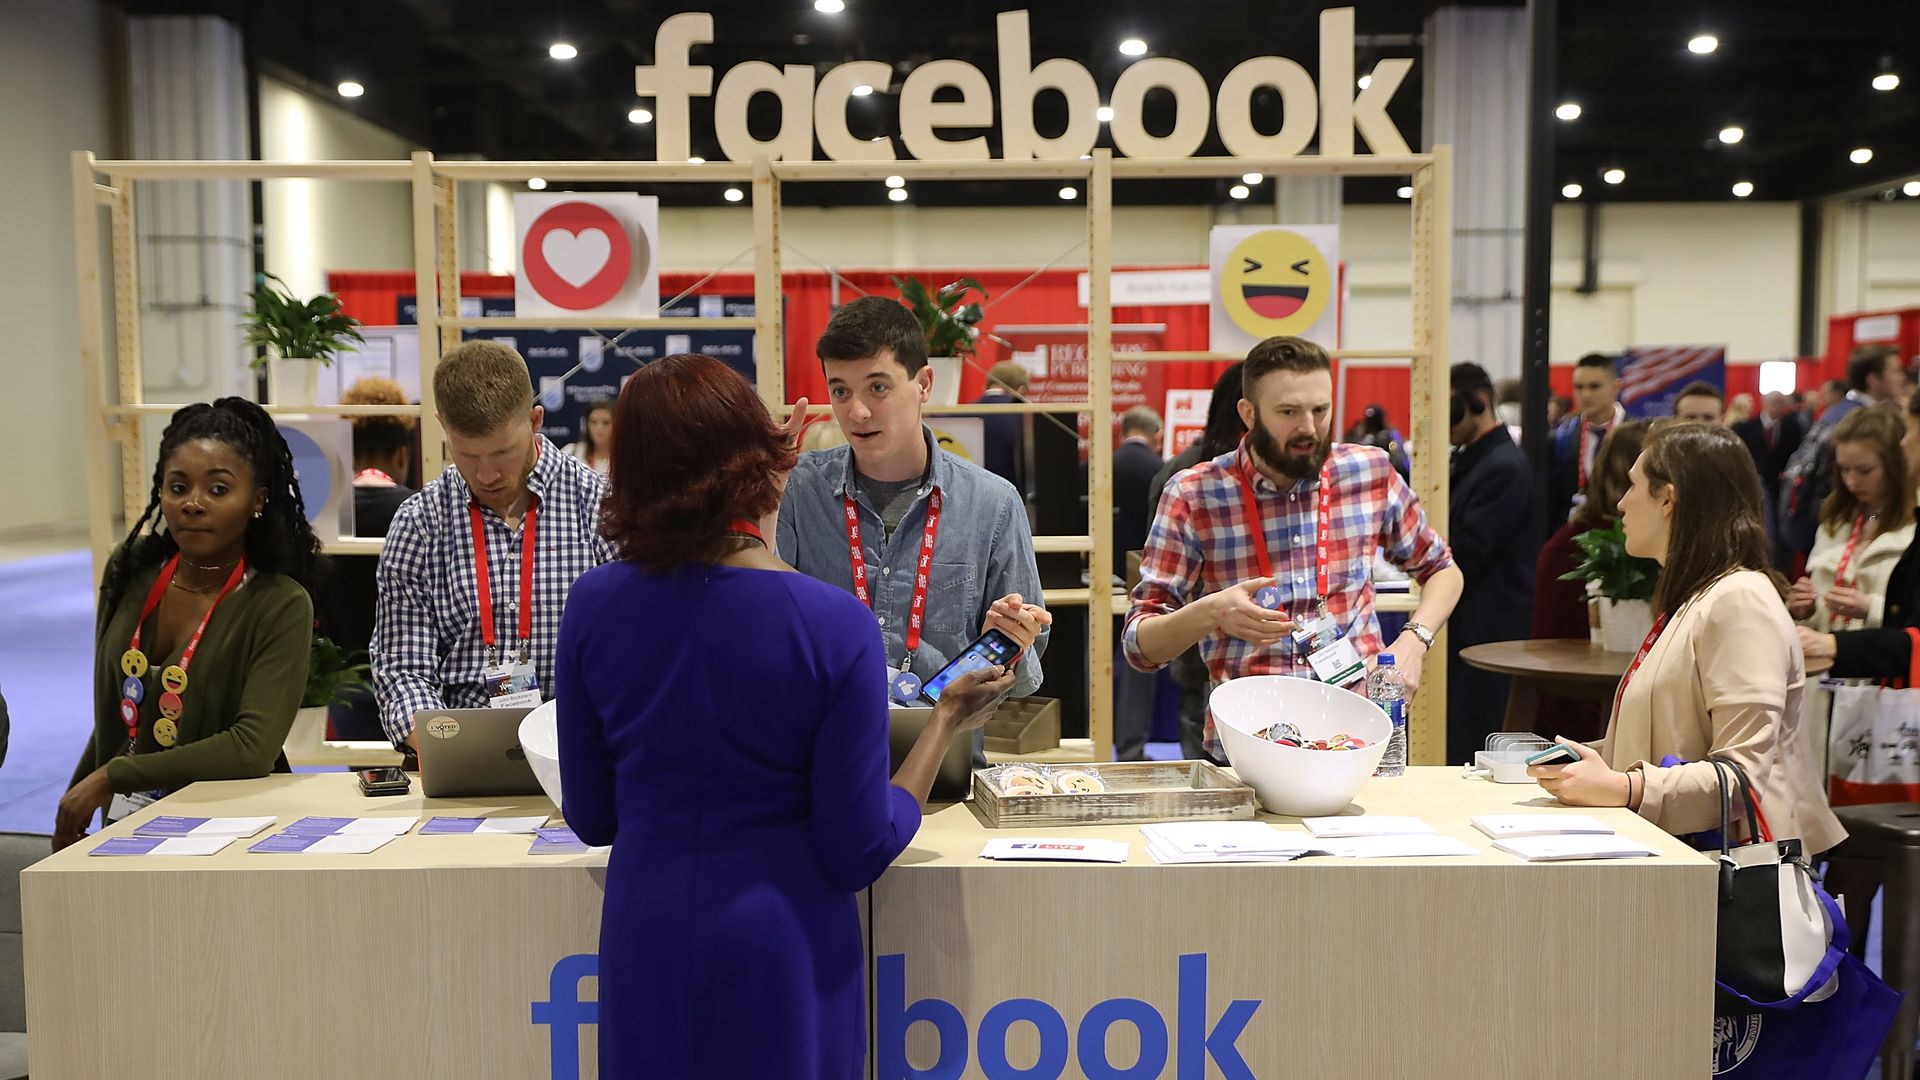 Facebook's booth at CPAC.